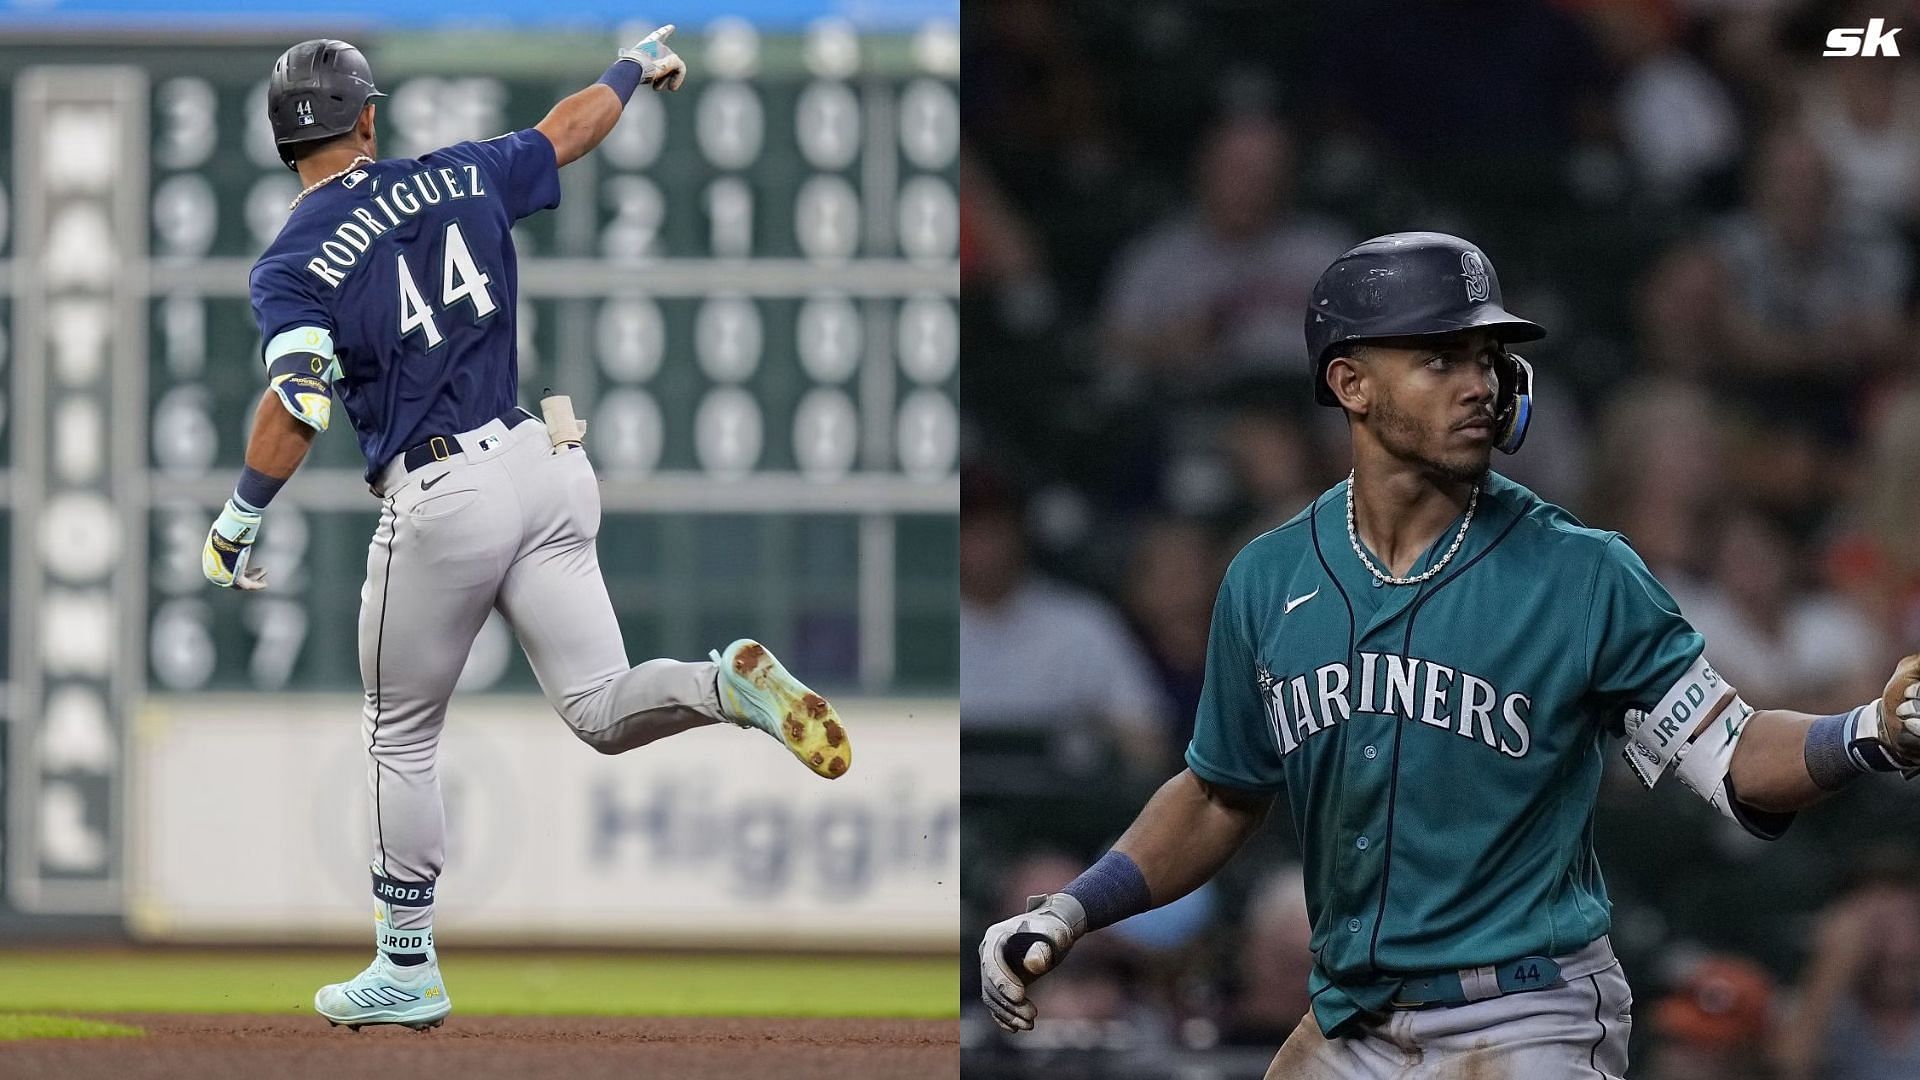 Scott Servais optimistic Julio Rodríguez will be back in lineup